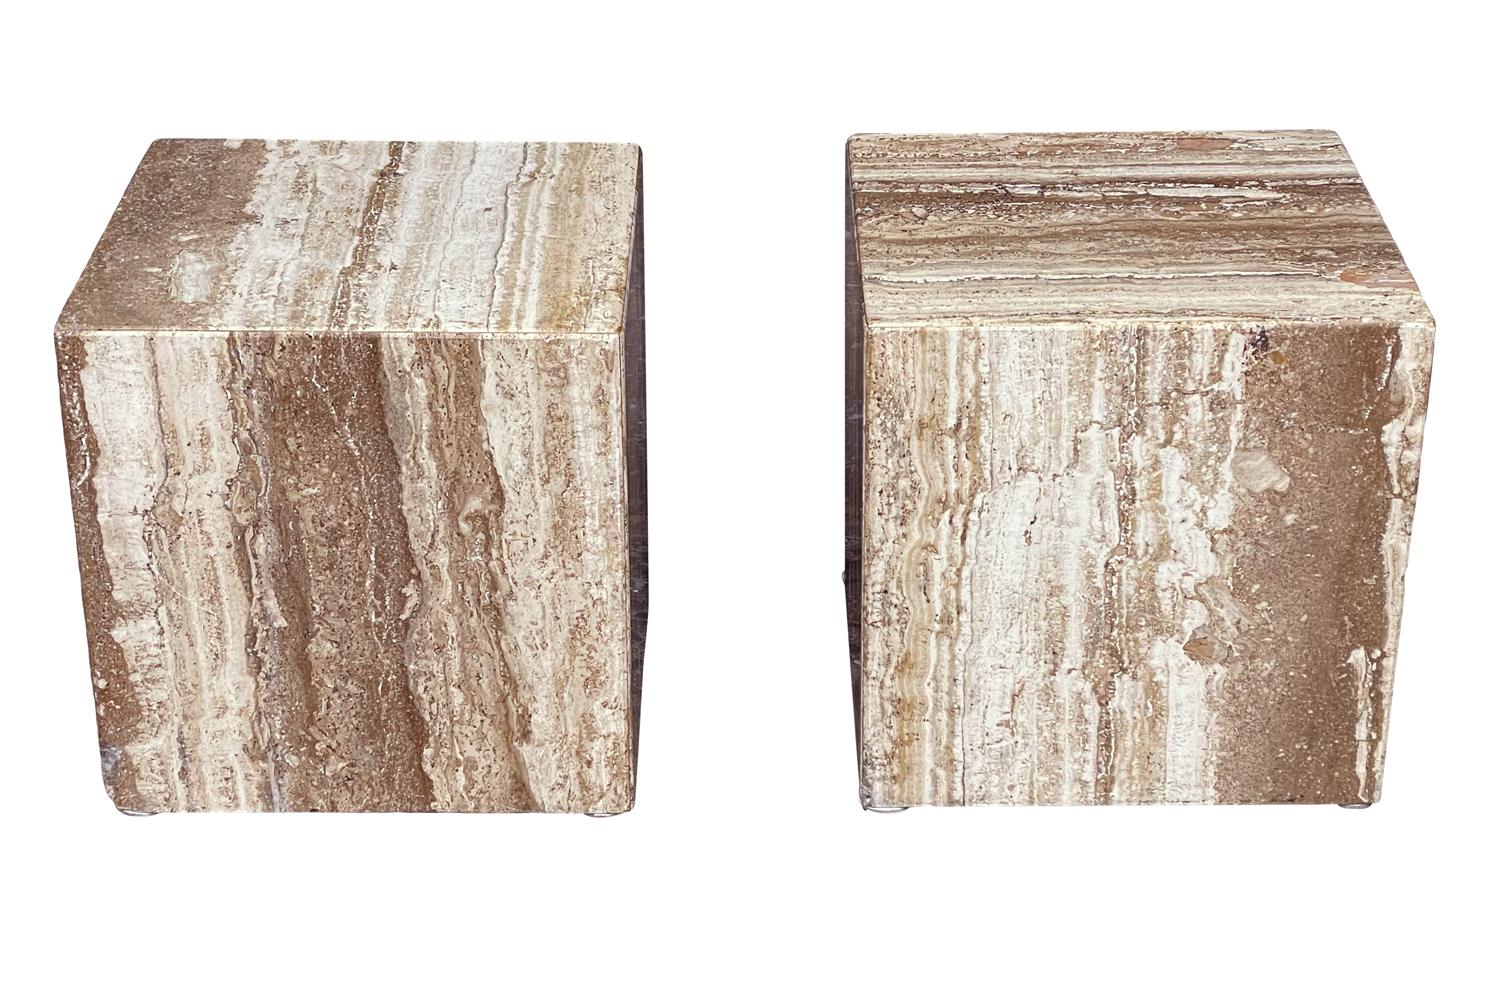 A simple pair of Classic cube tables from Italy circa 1980s. These feature solid travertine construction. Price includes the pair as shown.